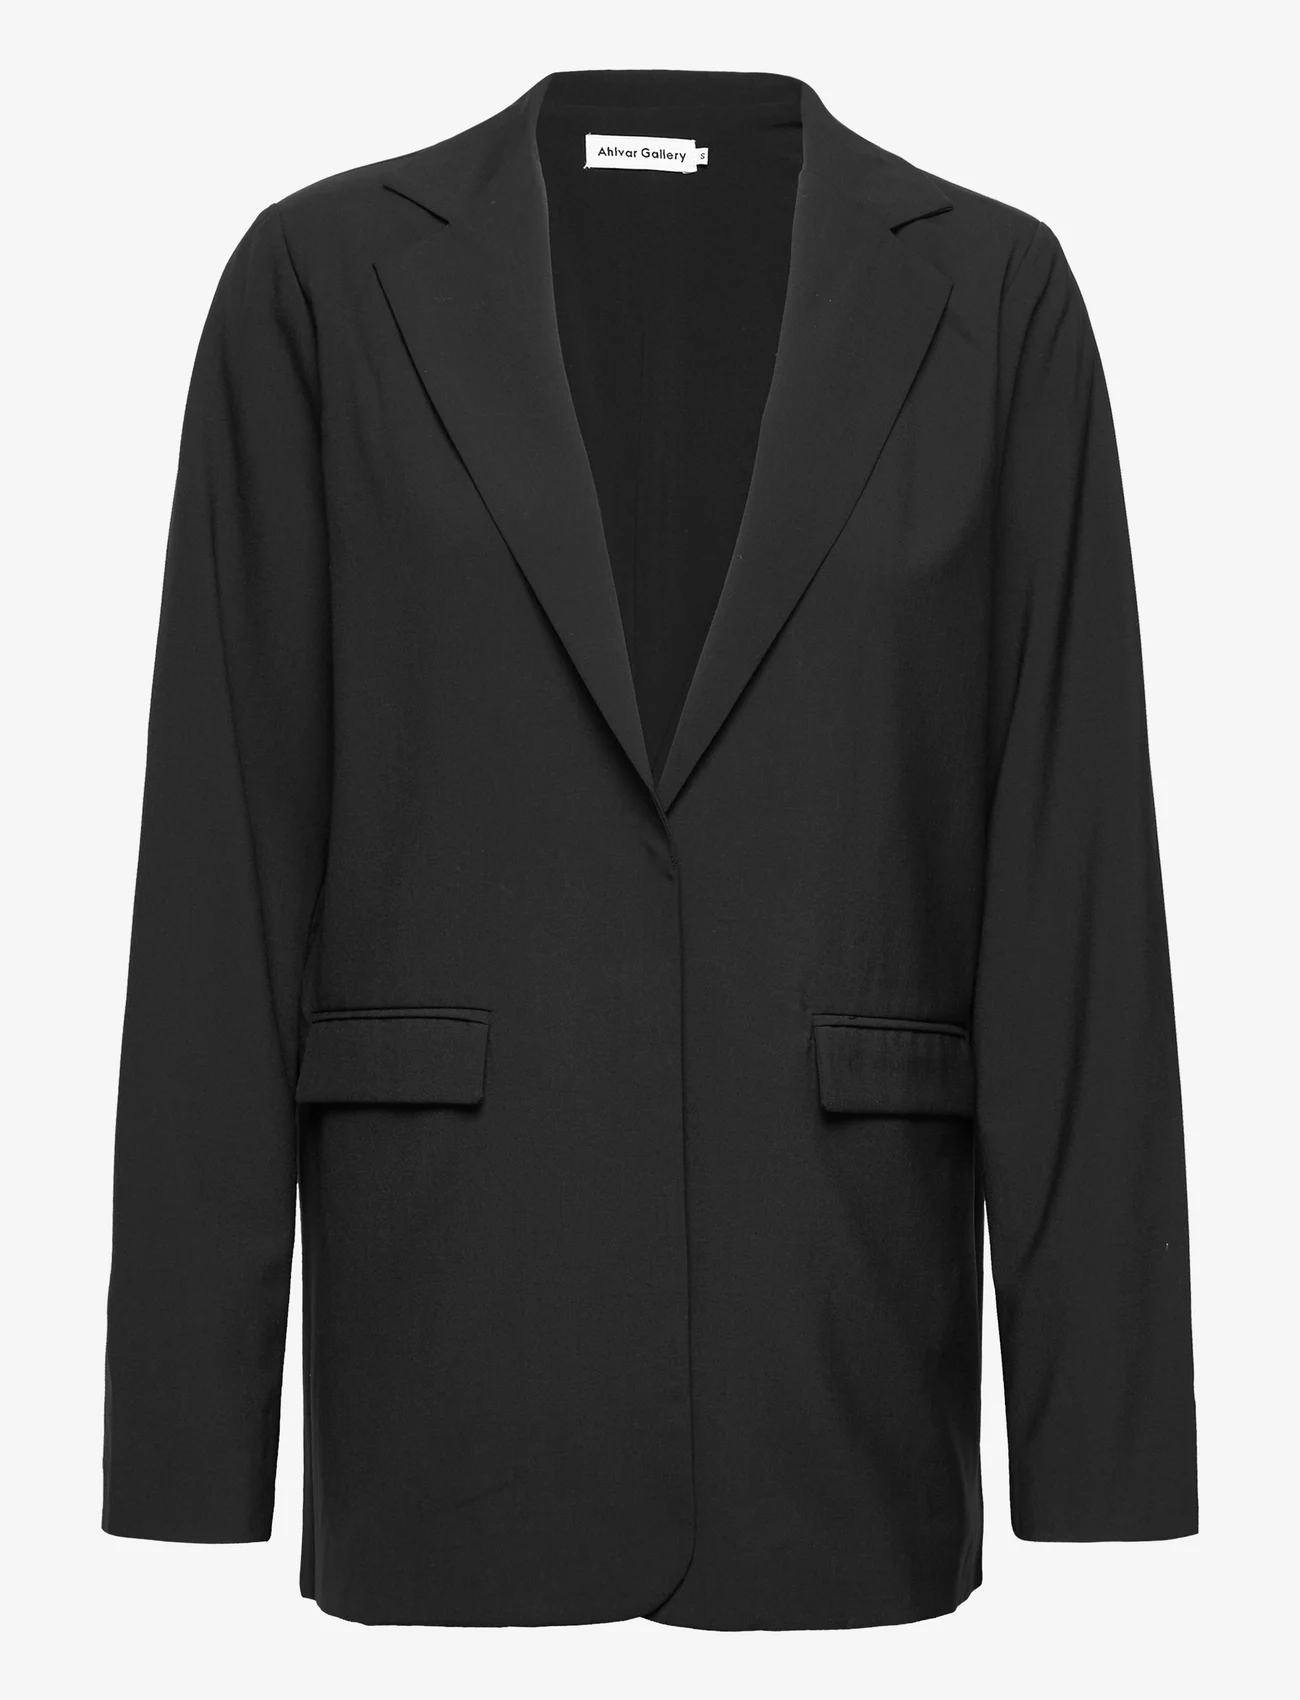 Ahlvar Gallery - Liv wool blazer - party wear at outlet prices - black - 0